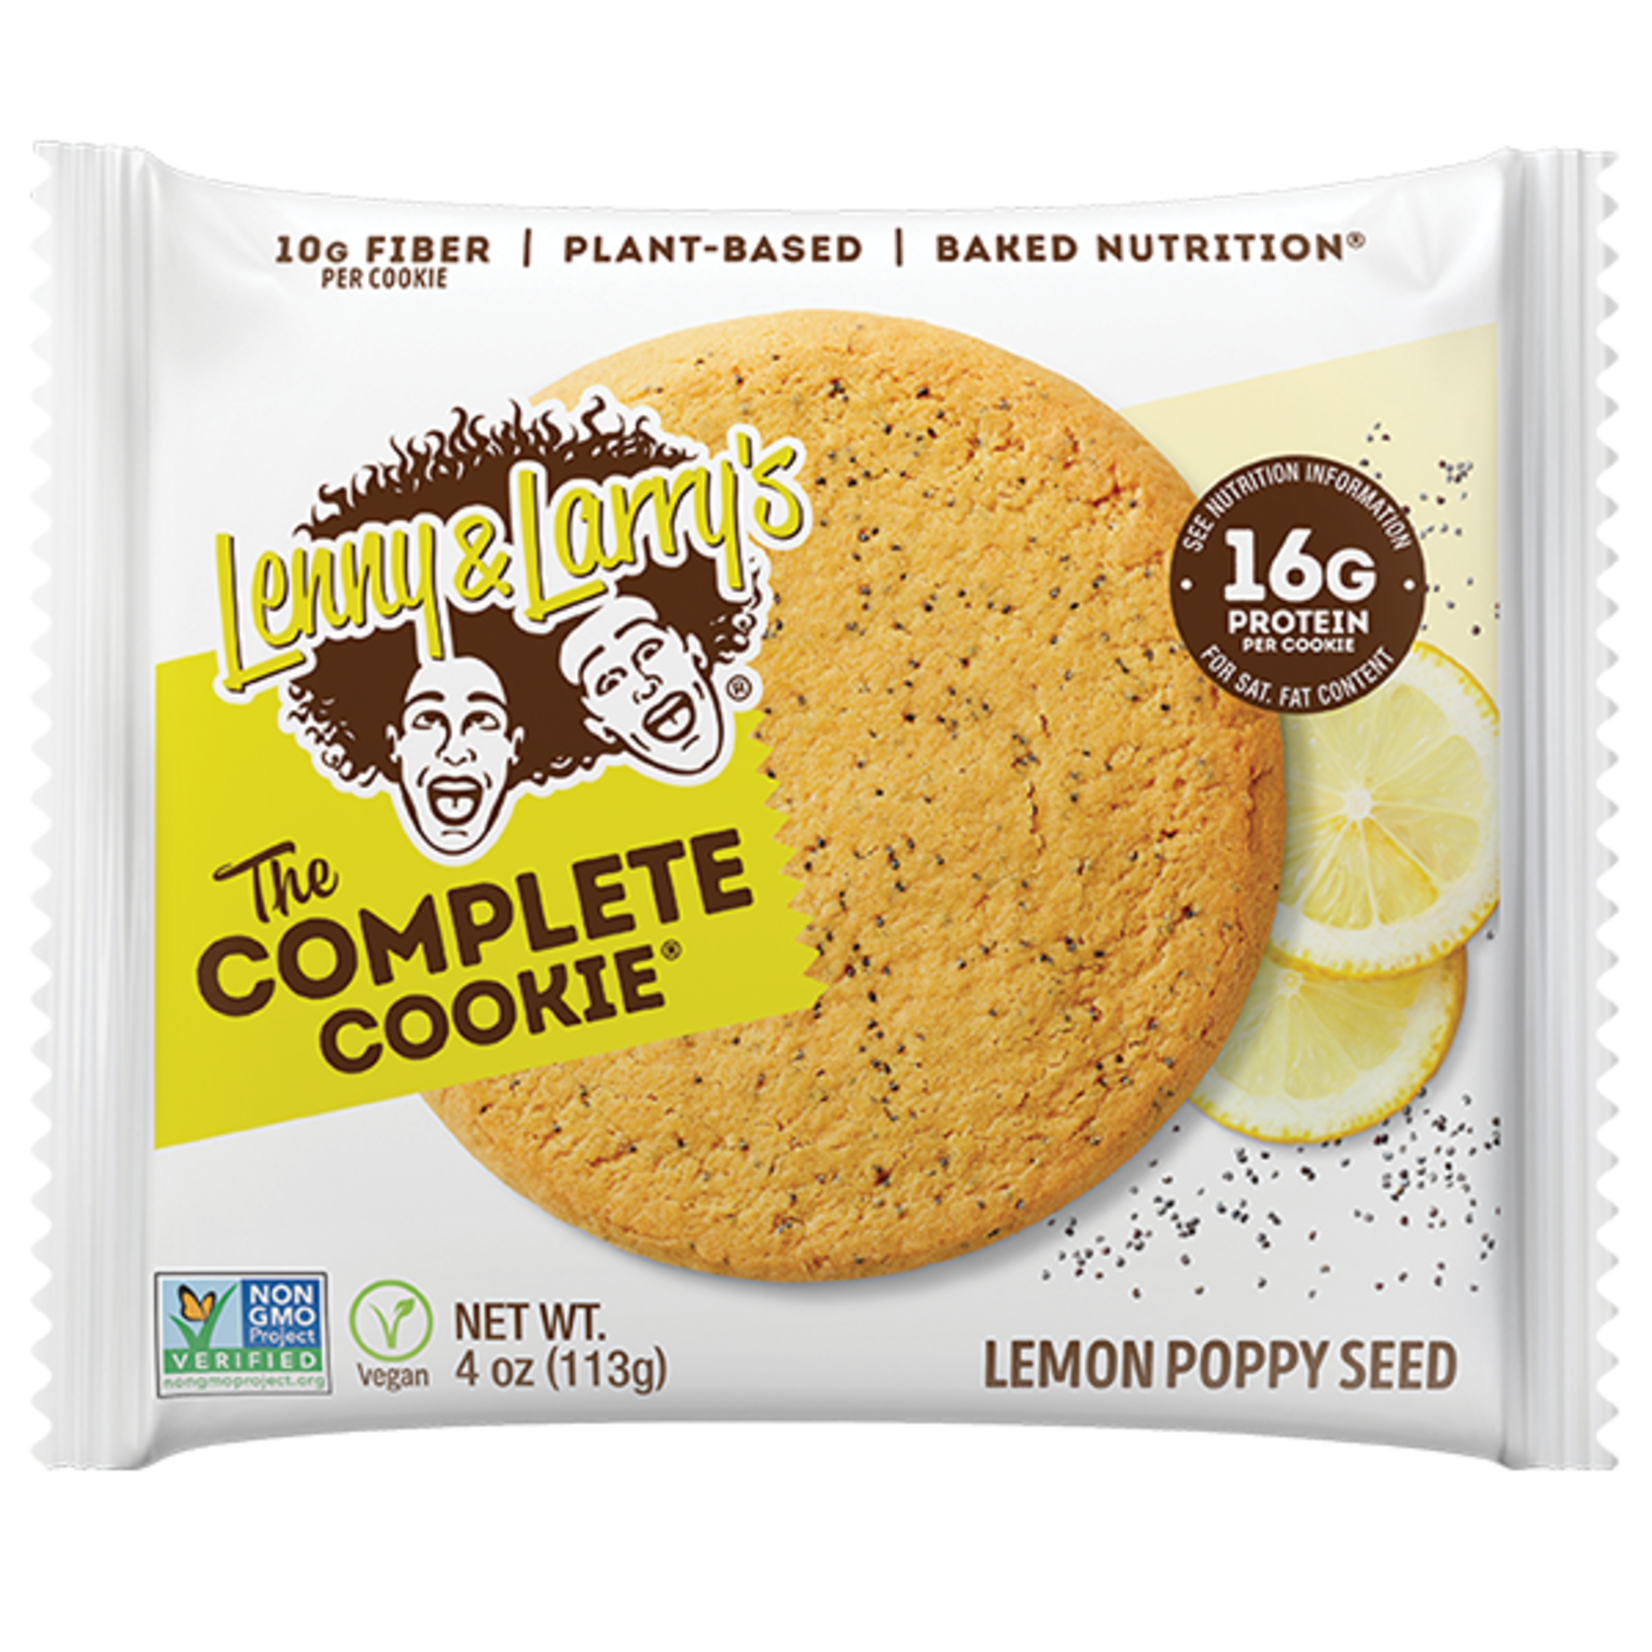 Lenny & Larry Lenny & Larry Complete Cookie